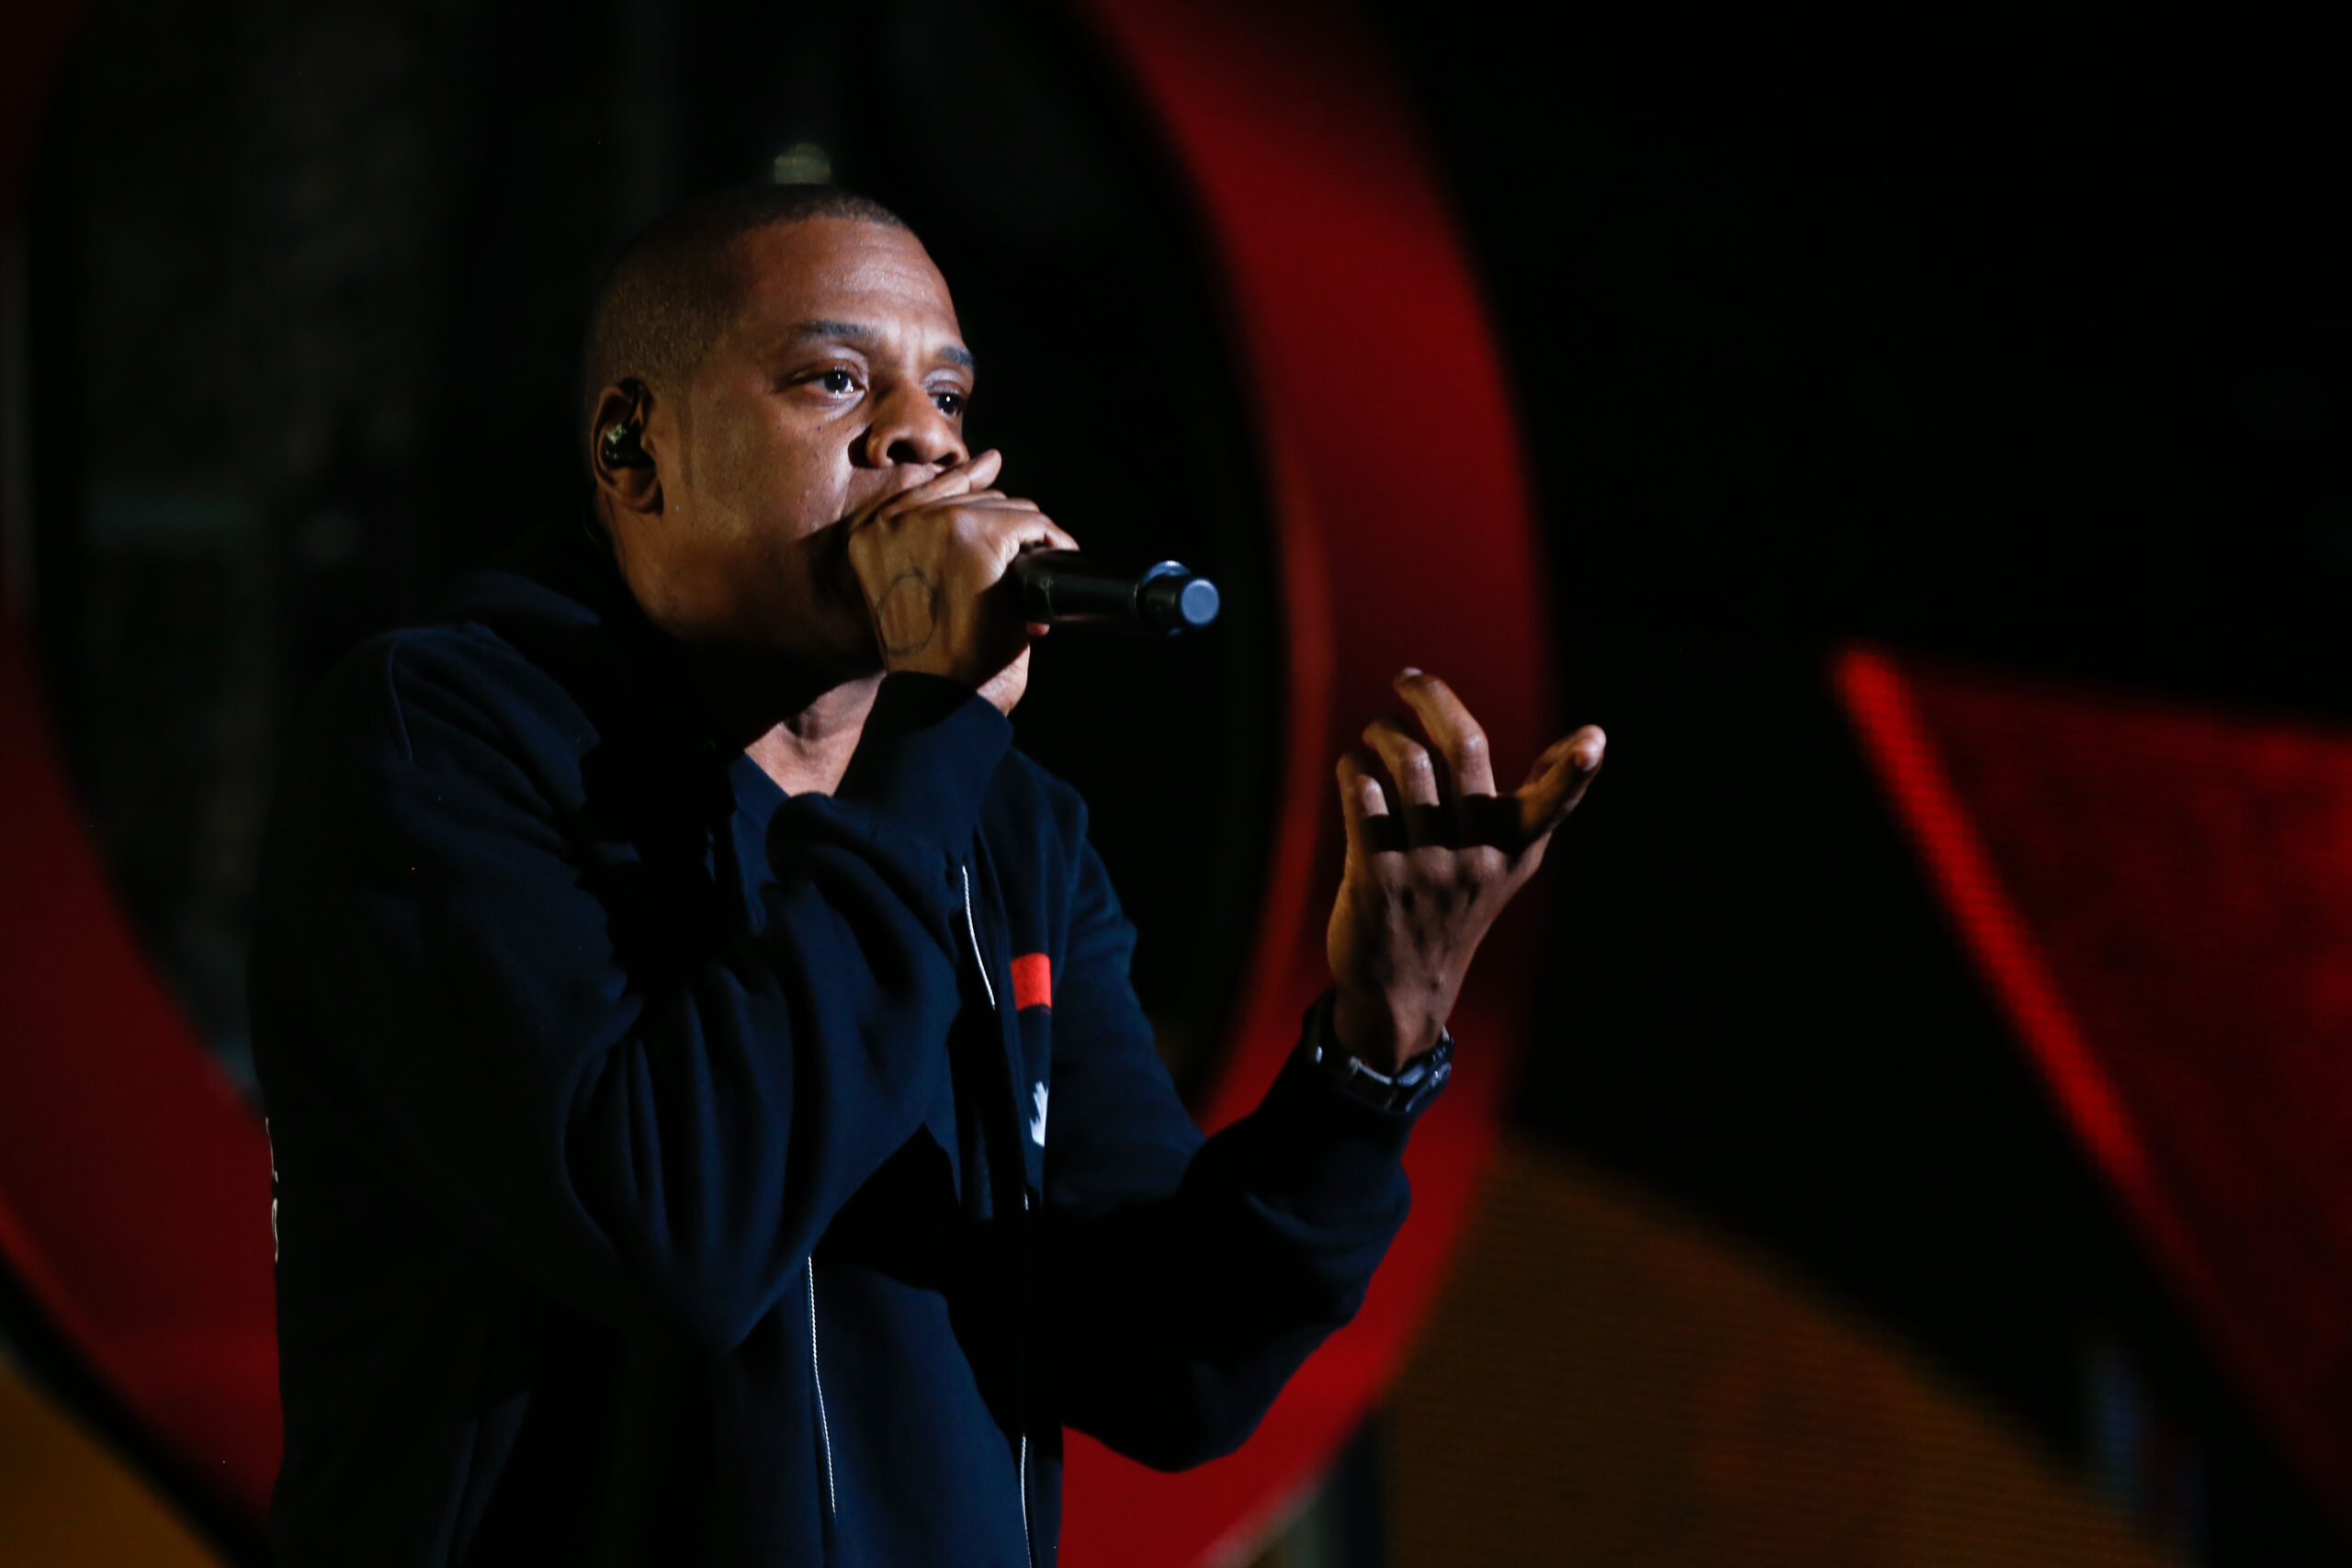 Rapper Jay-Z performs onstage at the 2014 Global Citizen Festival in Central Park on September 27, 2014